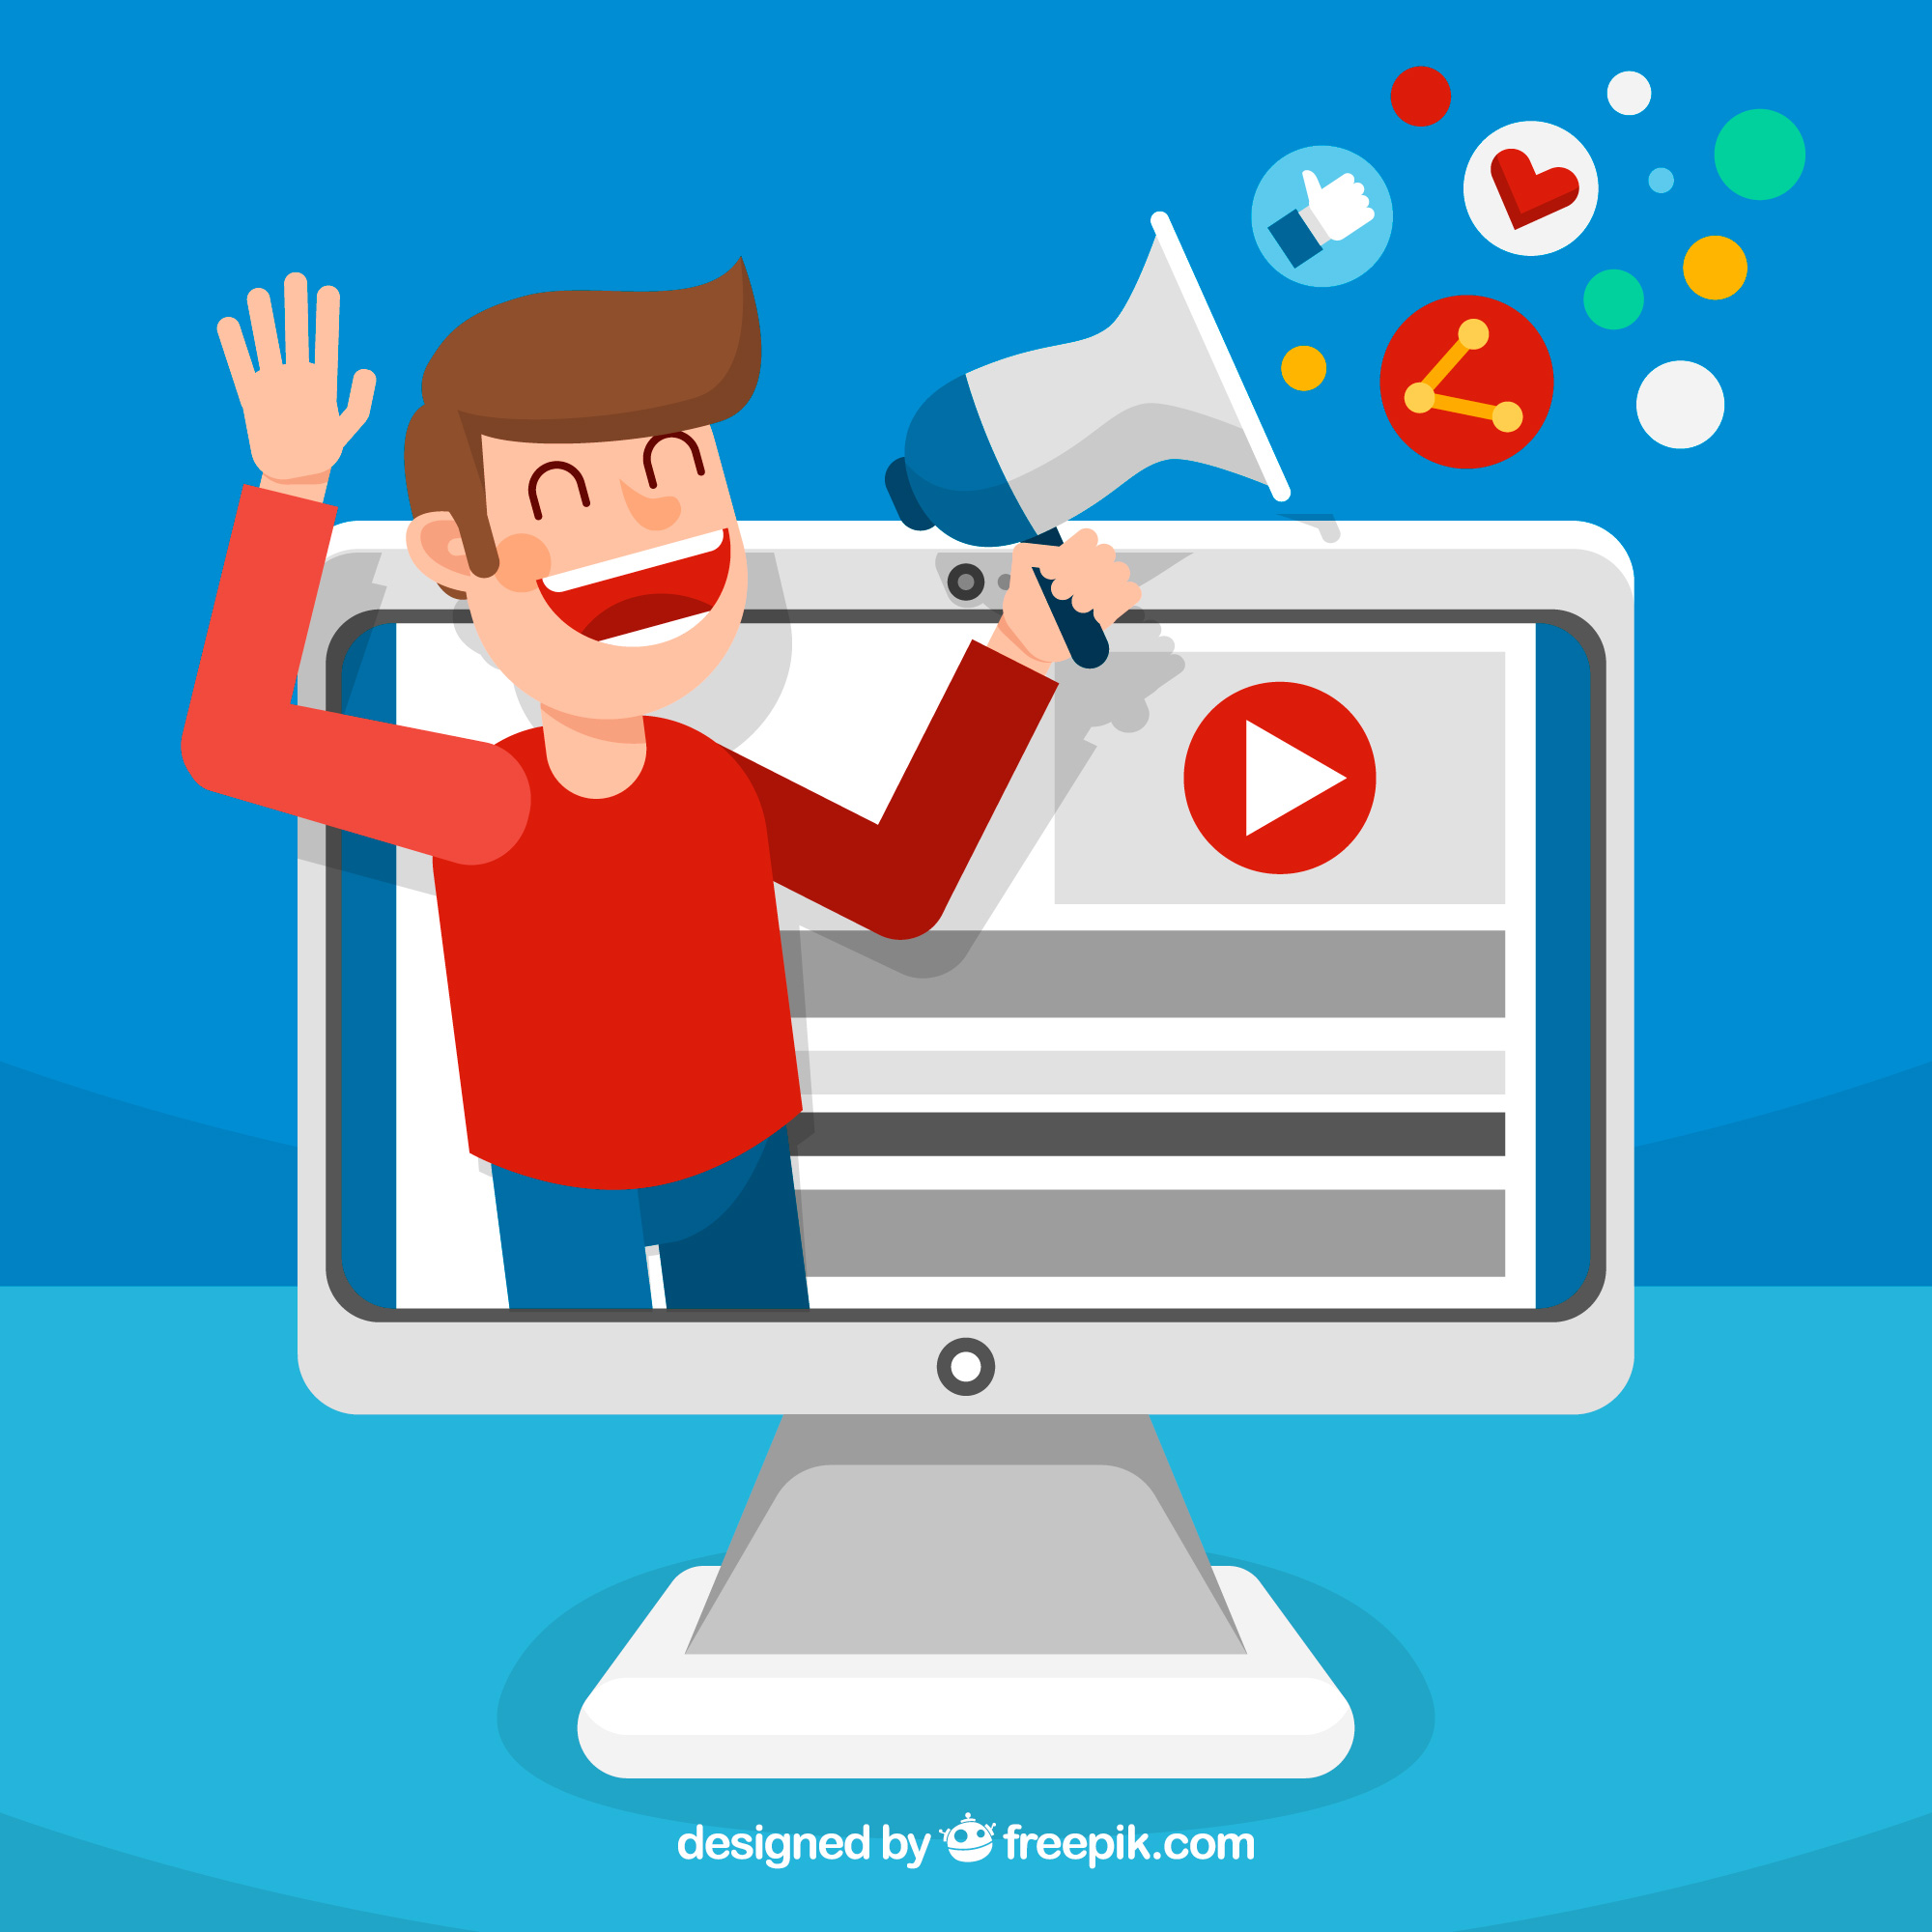 Video Bloggers who successfully monetized YouTube videos